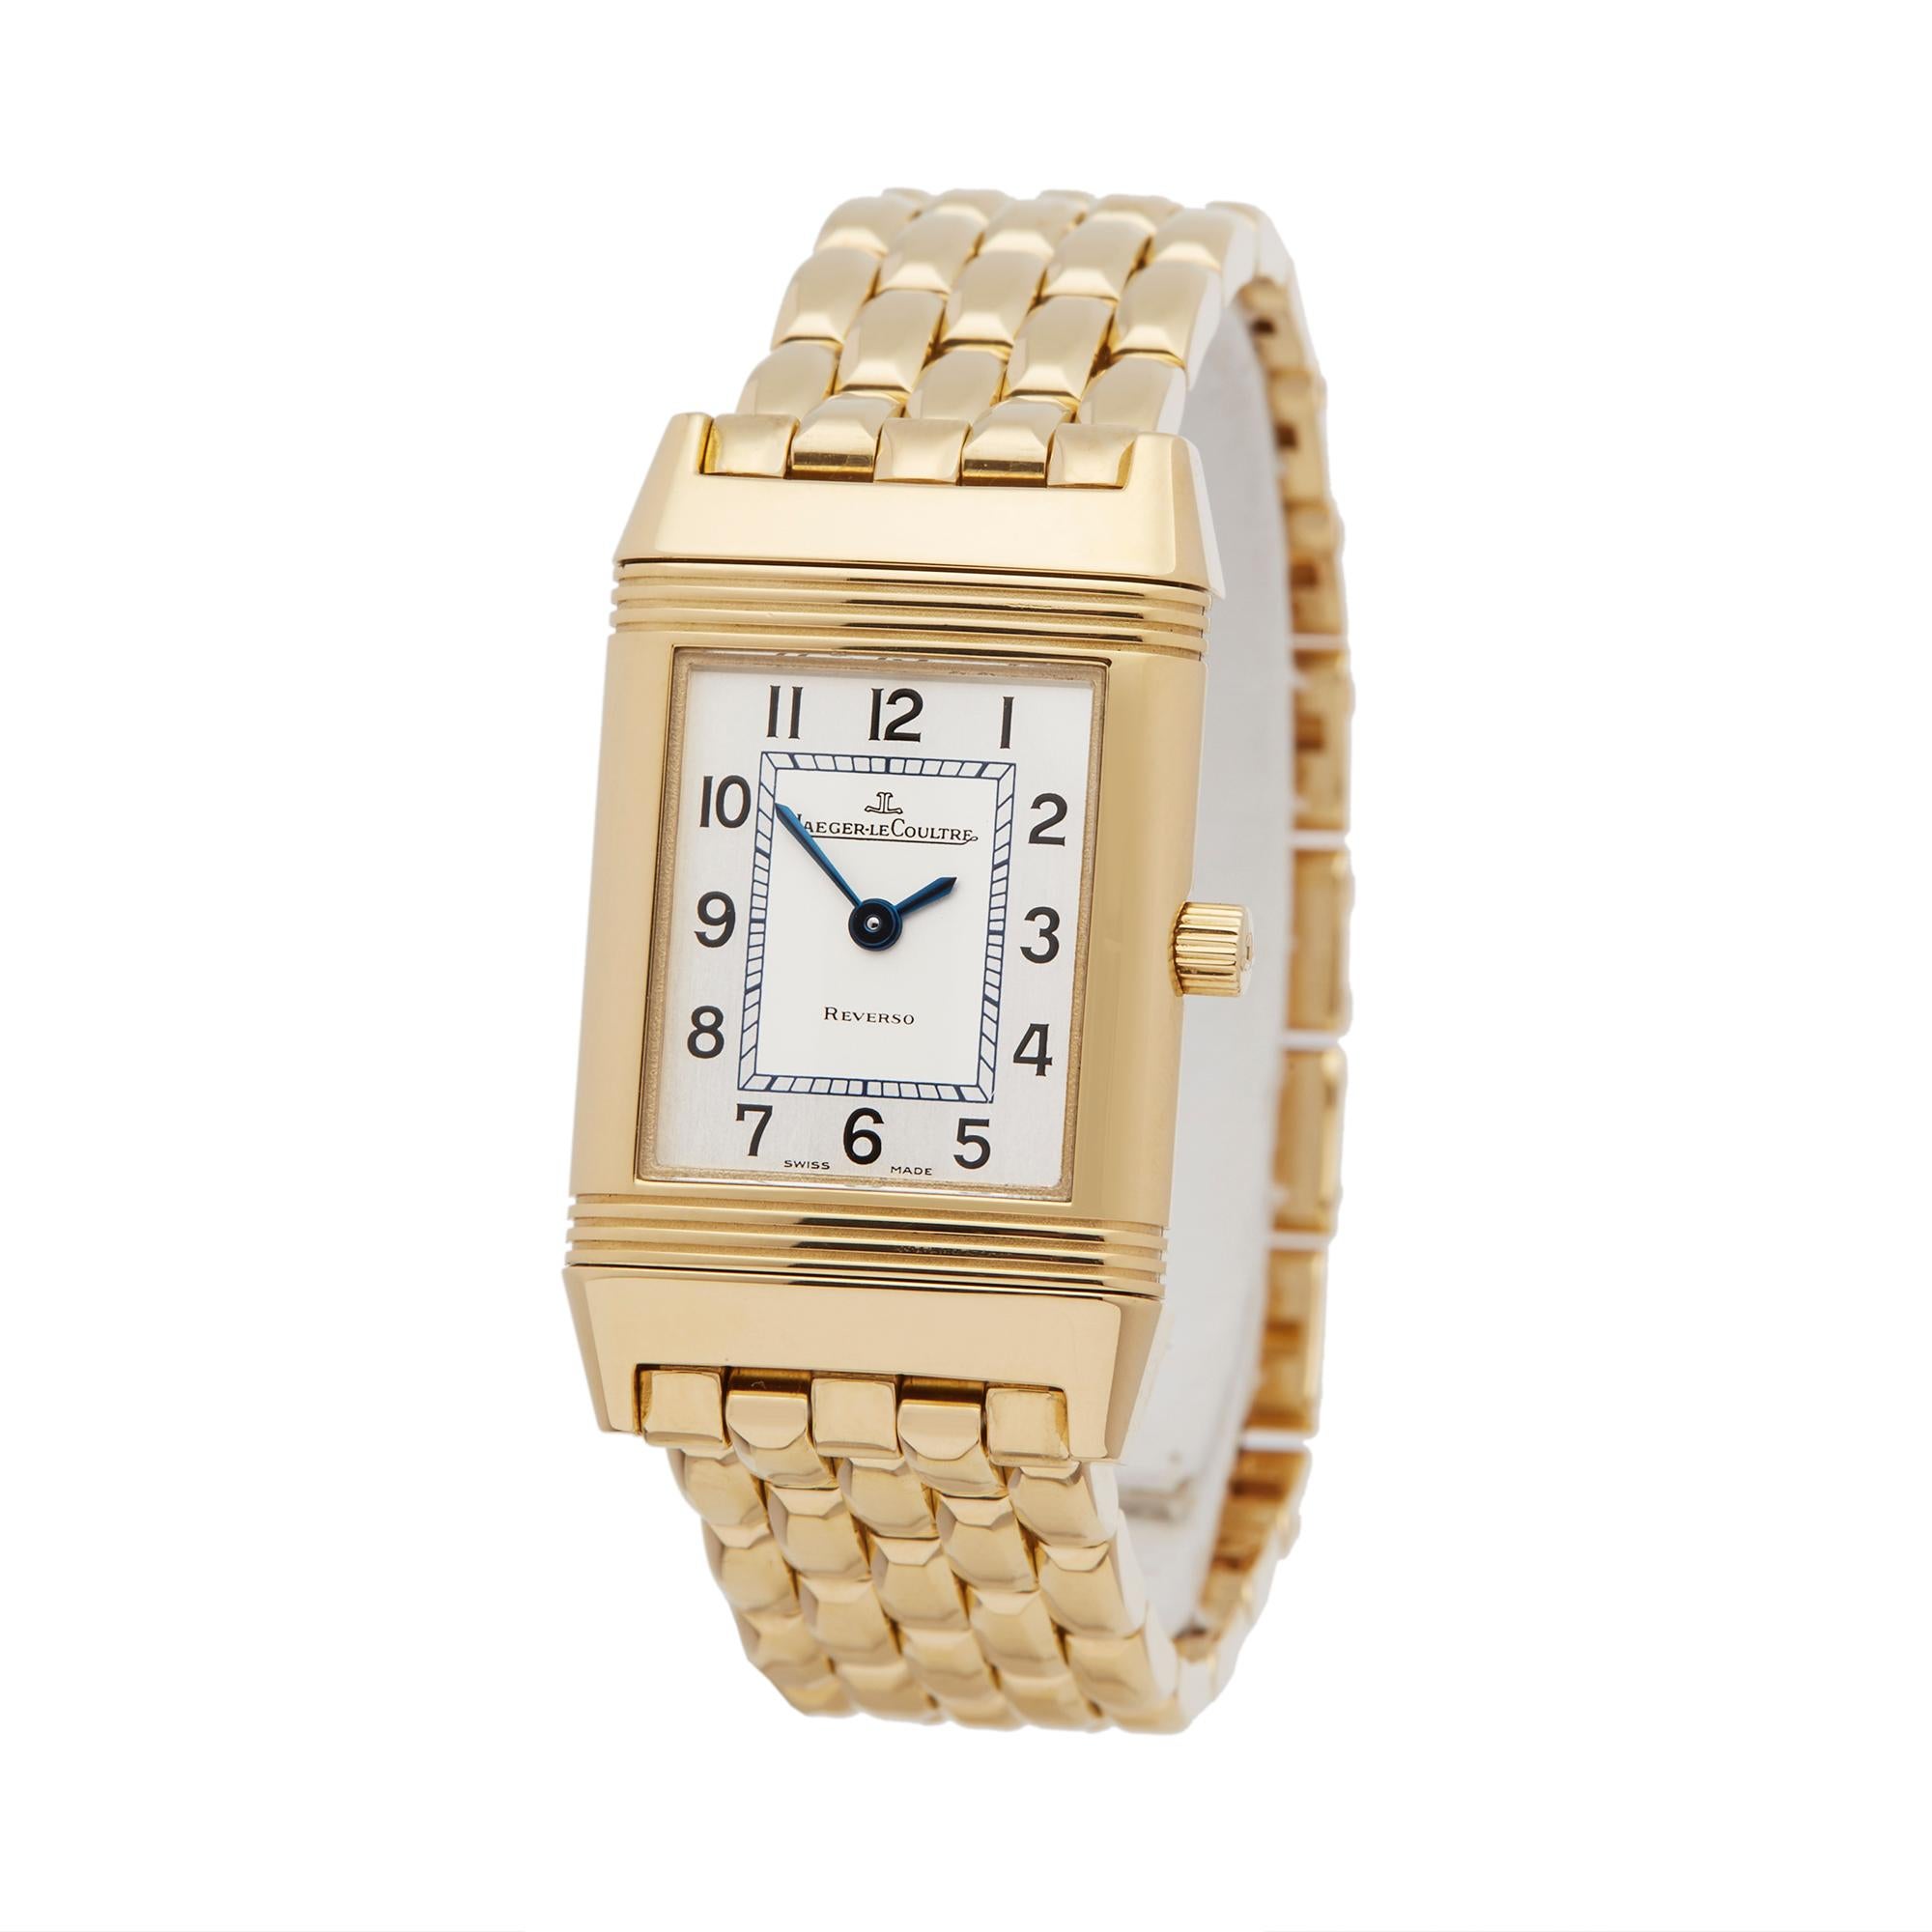 Ref: W5798
Manufacturer: Jaeger-LeCoultre
Model: Reverso
Model Ref: 260.1.47
Age: Circa 2000's
Gender: Ladies
Complete With: Box Only
Dial: Silver Arabic
Glass: Sapphire Crystal
Movement: Quartz
Water Resistance: To Manufacturers